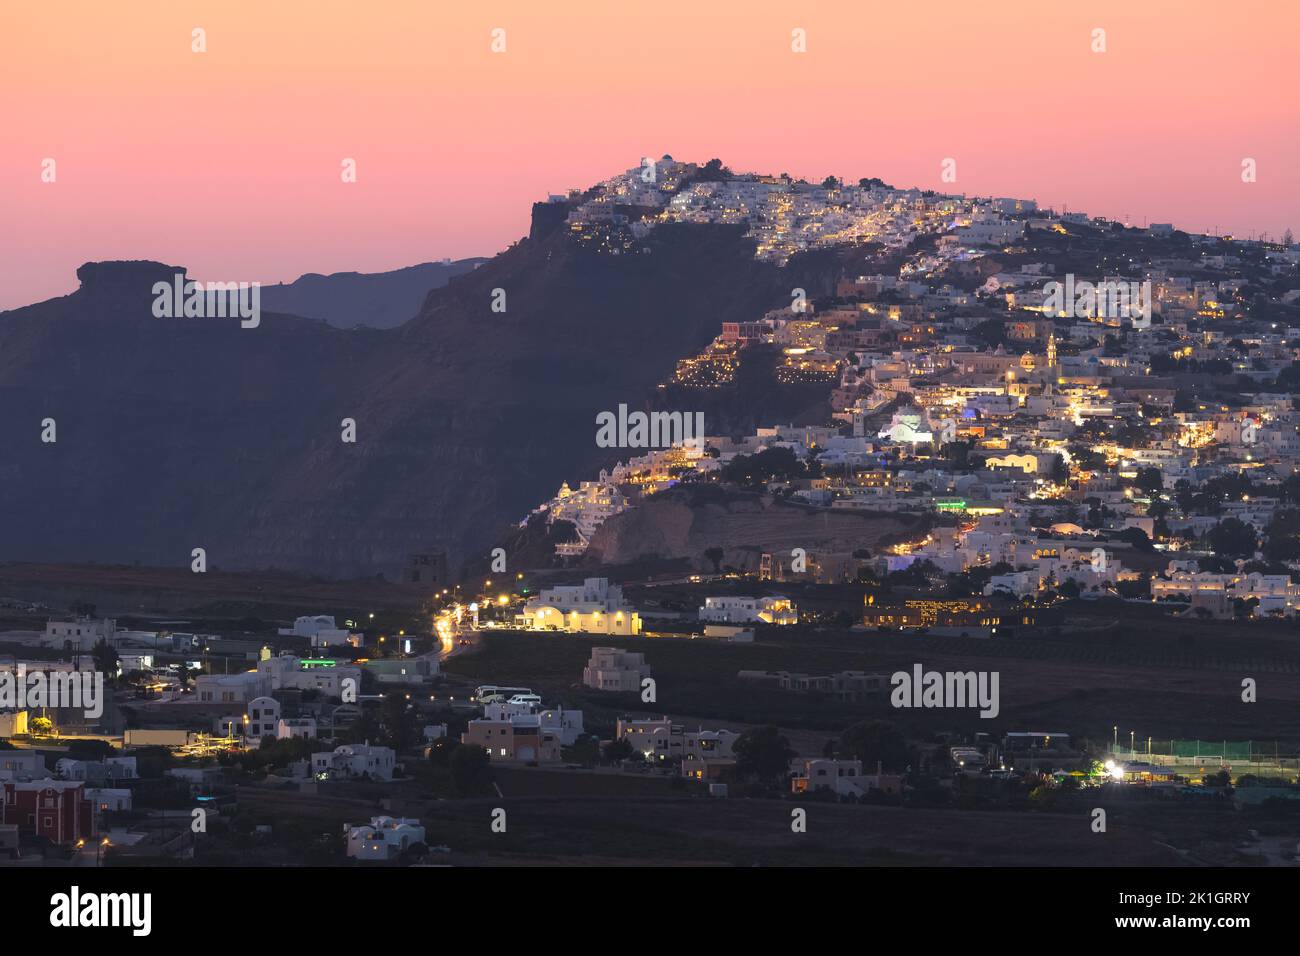 Cityscape and countryside view of Thera, the capital city of Santorini in the Greek Islands of Greece, on a hilltop of volcanic rock during a vibrant, Stock Photo